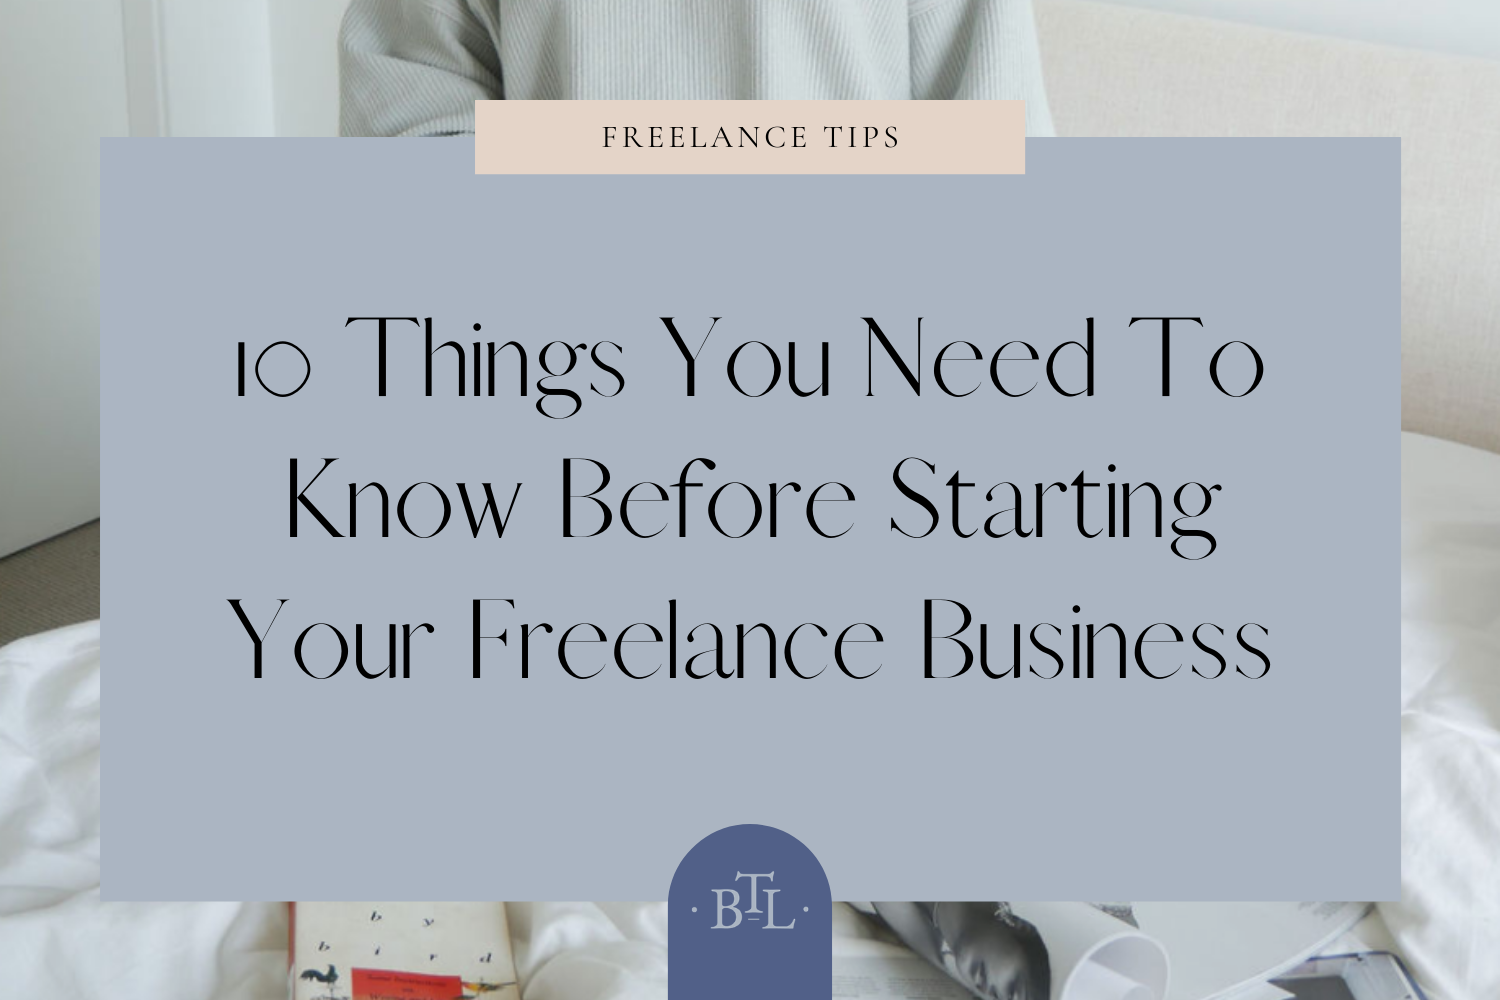 Starting A Freelance Business? Read This First!